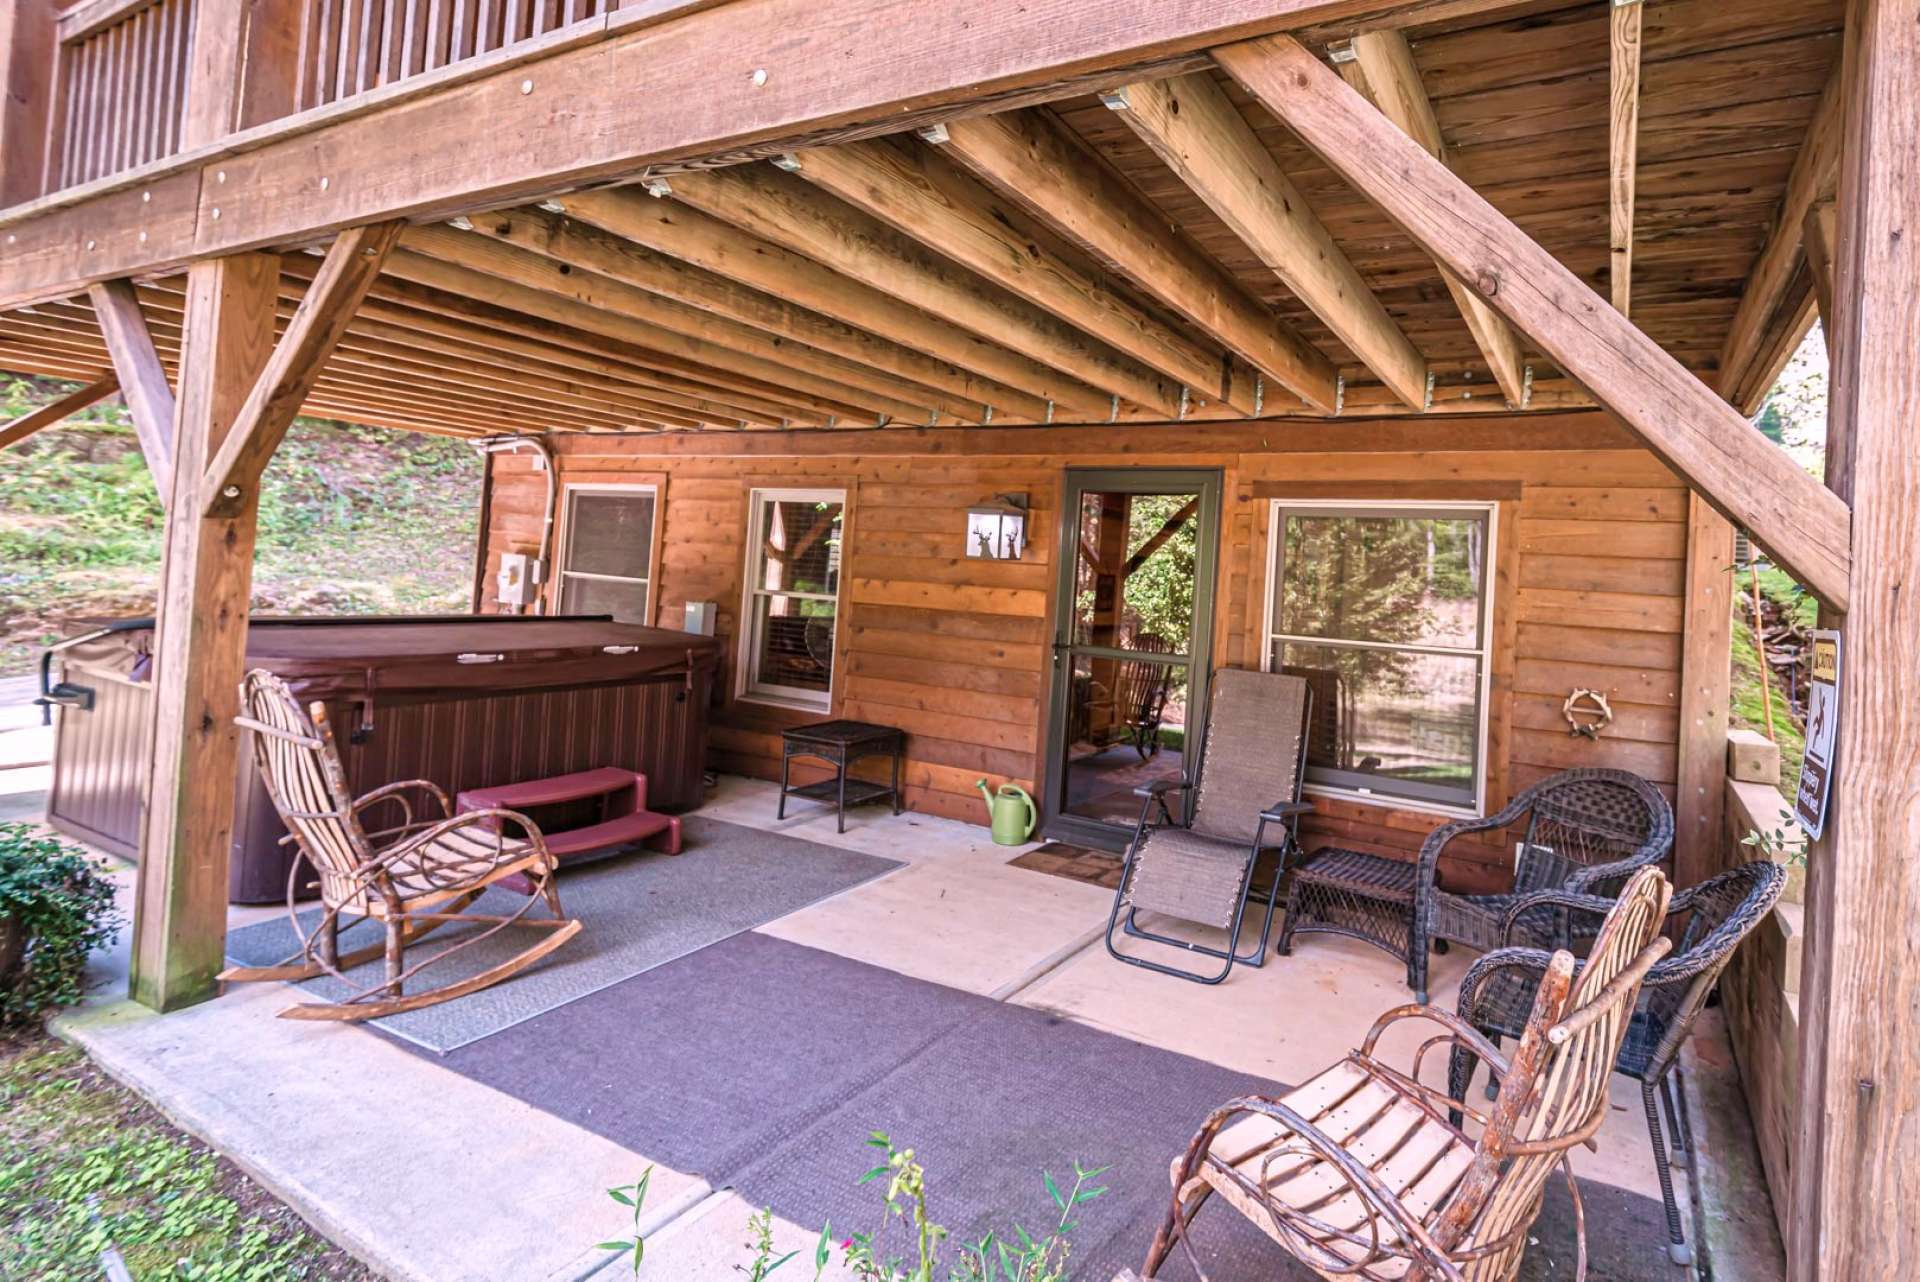 The lower level also enjoys a private covered patio area with hot tub.